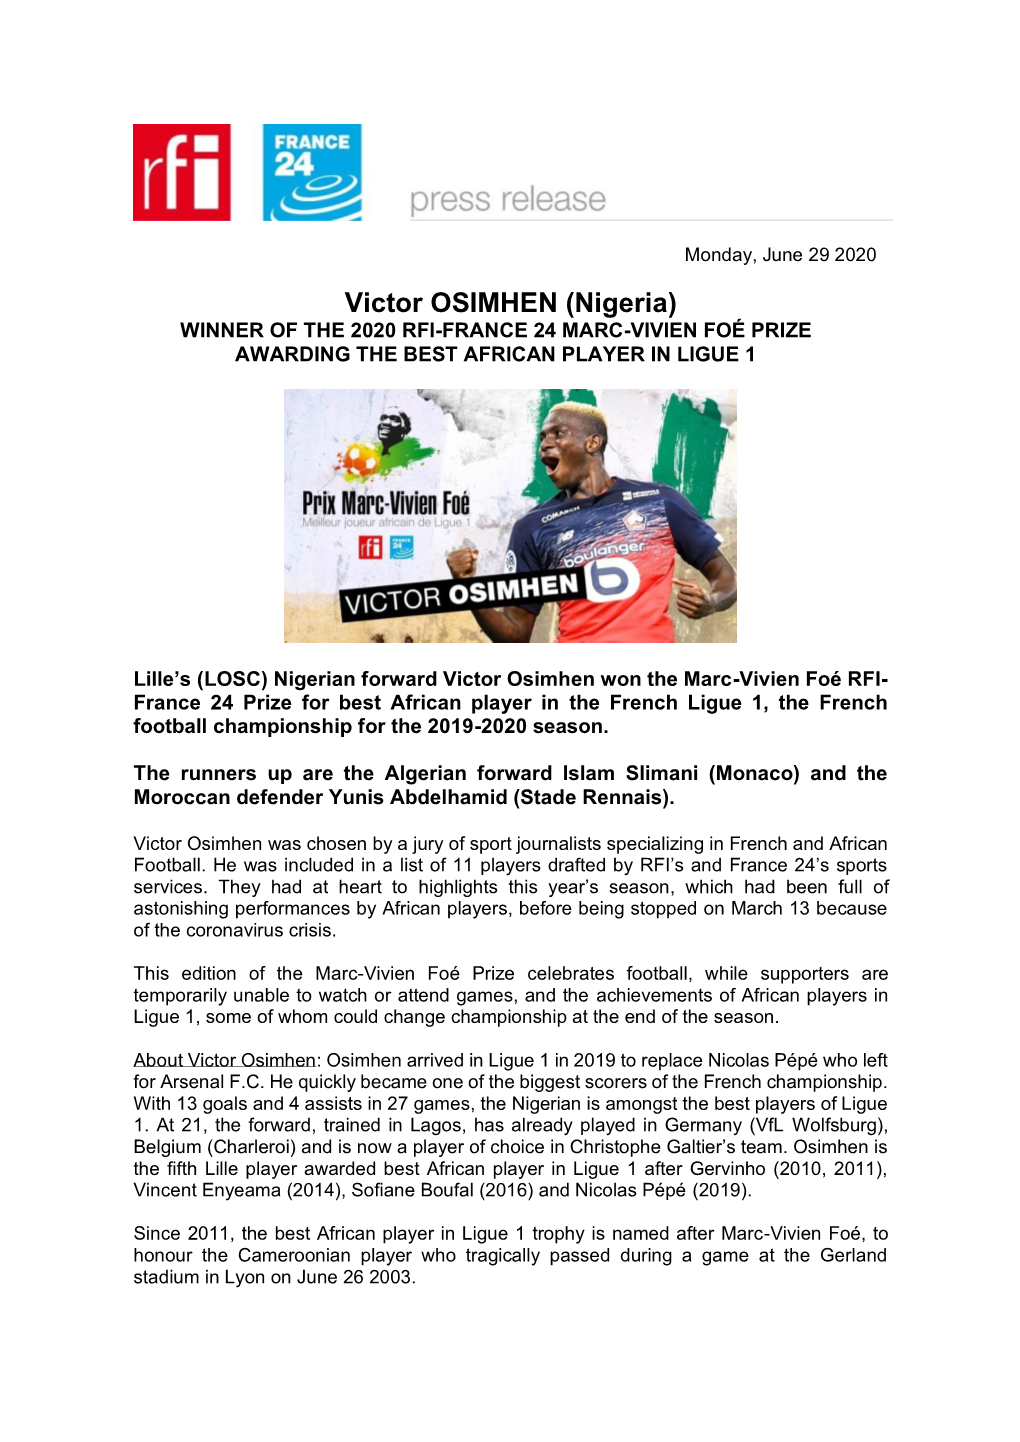 Victor OSIMHEN (Nigeria) WINNER of the 2020 RFI-FRANCE 24 MARC-VIVIEN FOÉ PRIZE AWARDING the BEST AFRICAN PLAYER in LIGUE 1